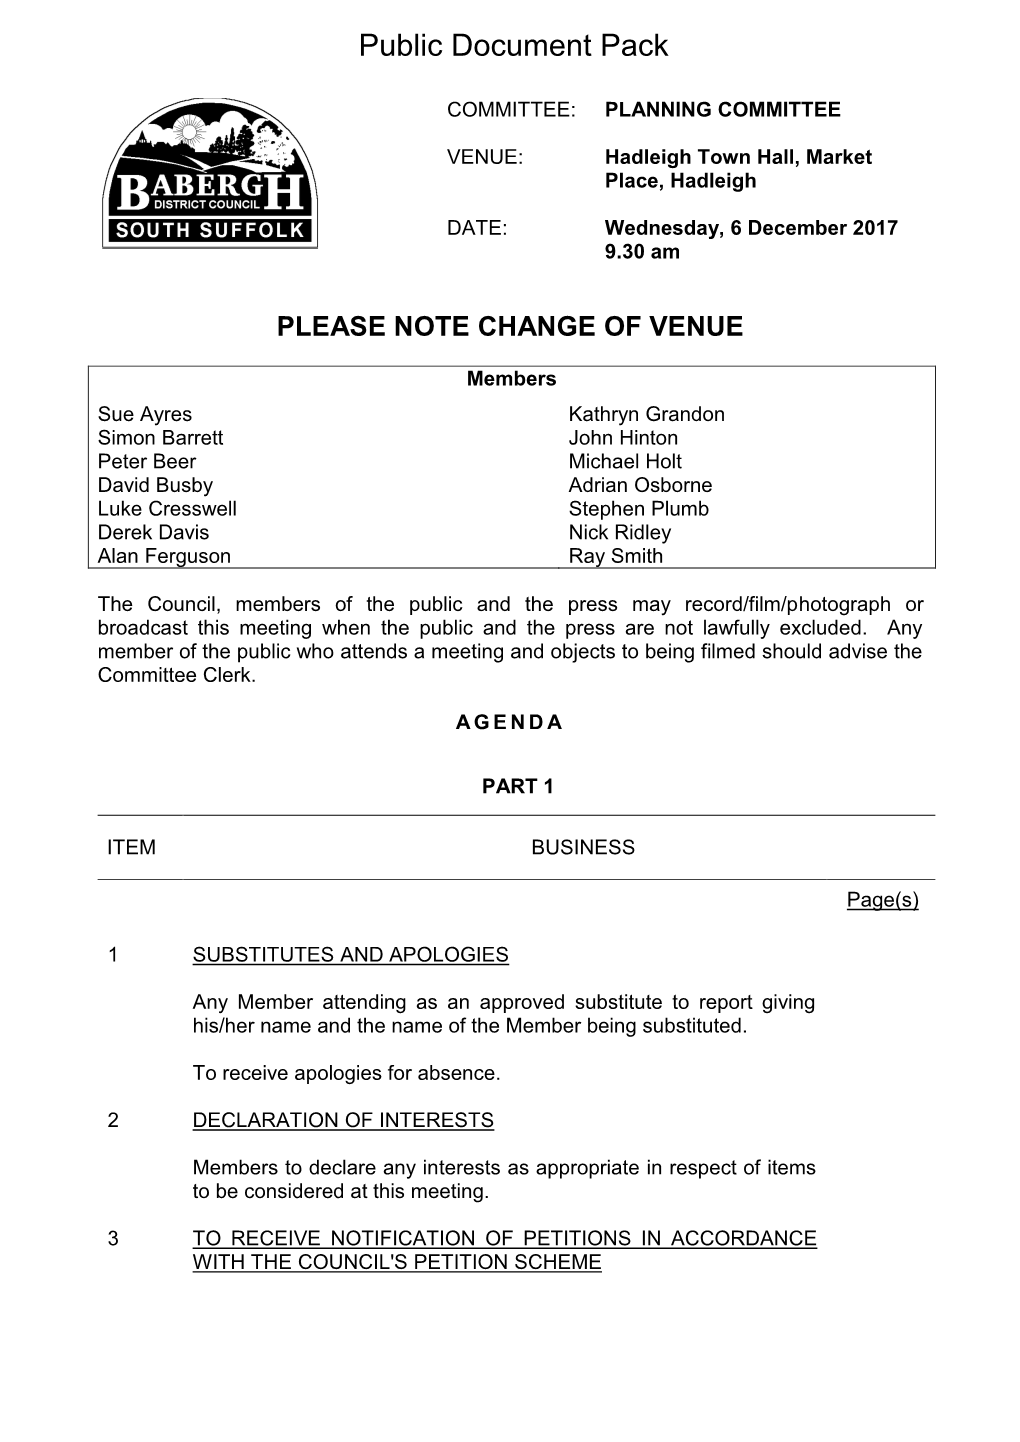 (Public Pack)Agenda Document for Babergh Planning Committee, 06/12/2017 09:30